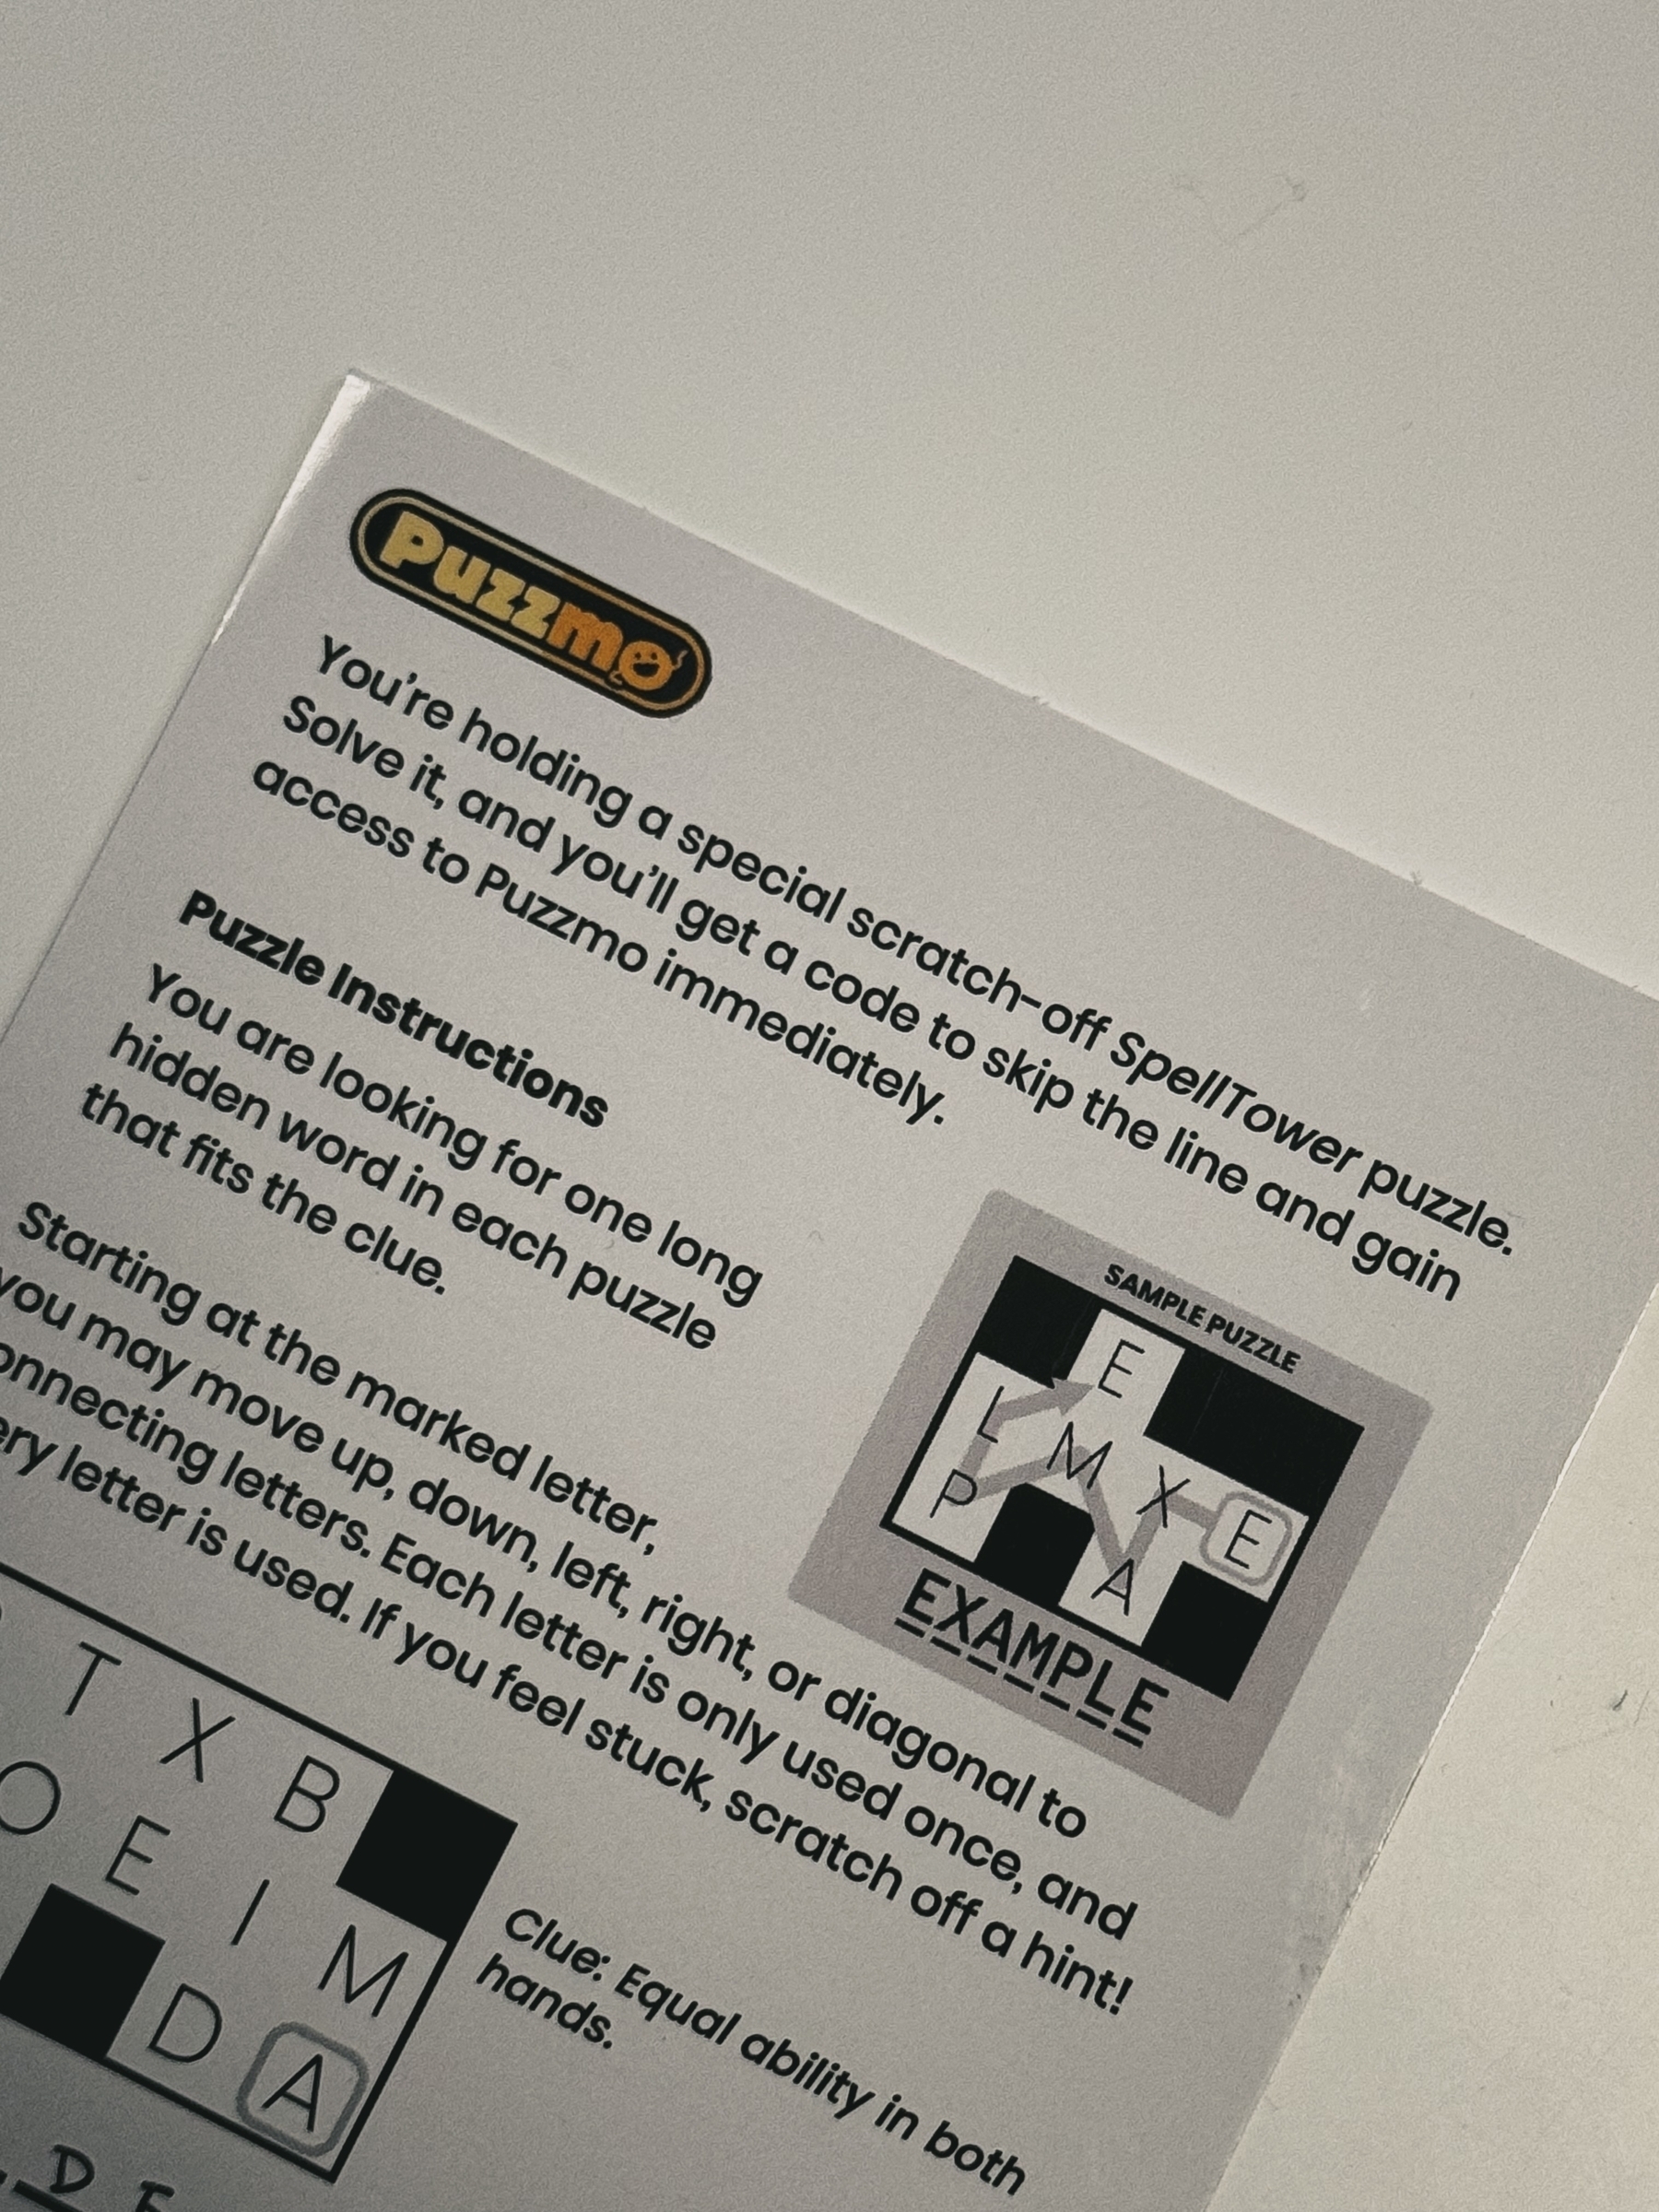 Mailer with puzzles and word games to unlock access to the Puzzmo website